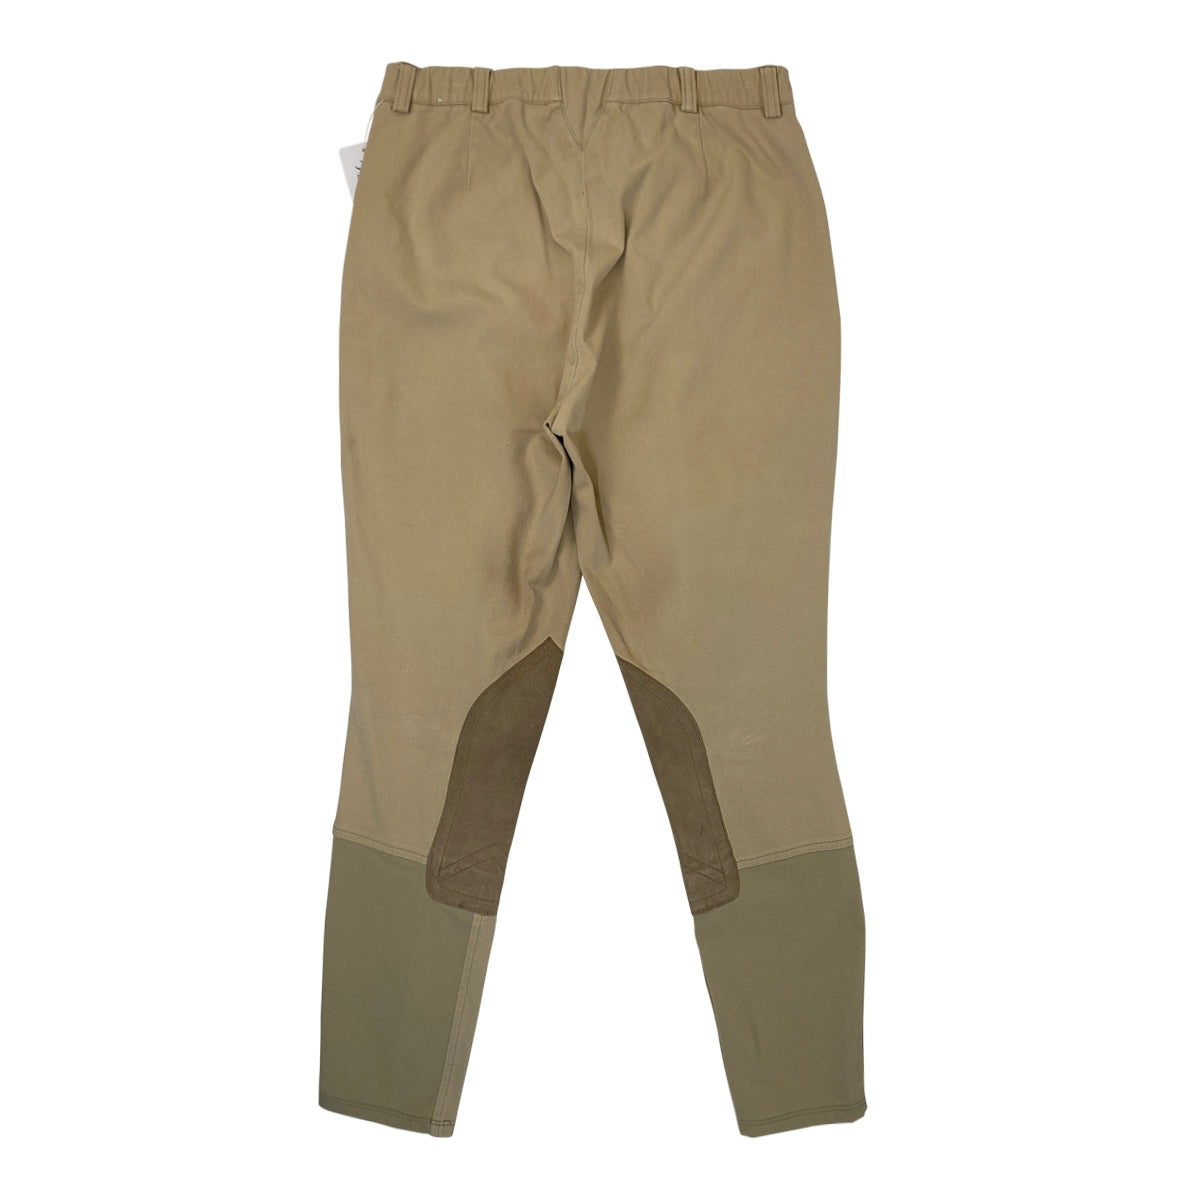 Ariat 'All Circuit' Side Zip Breeches in Tan